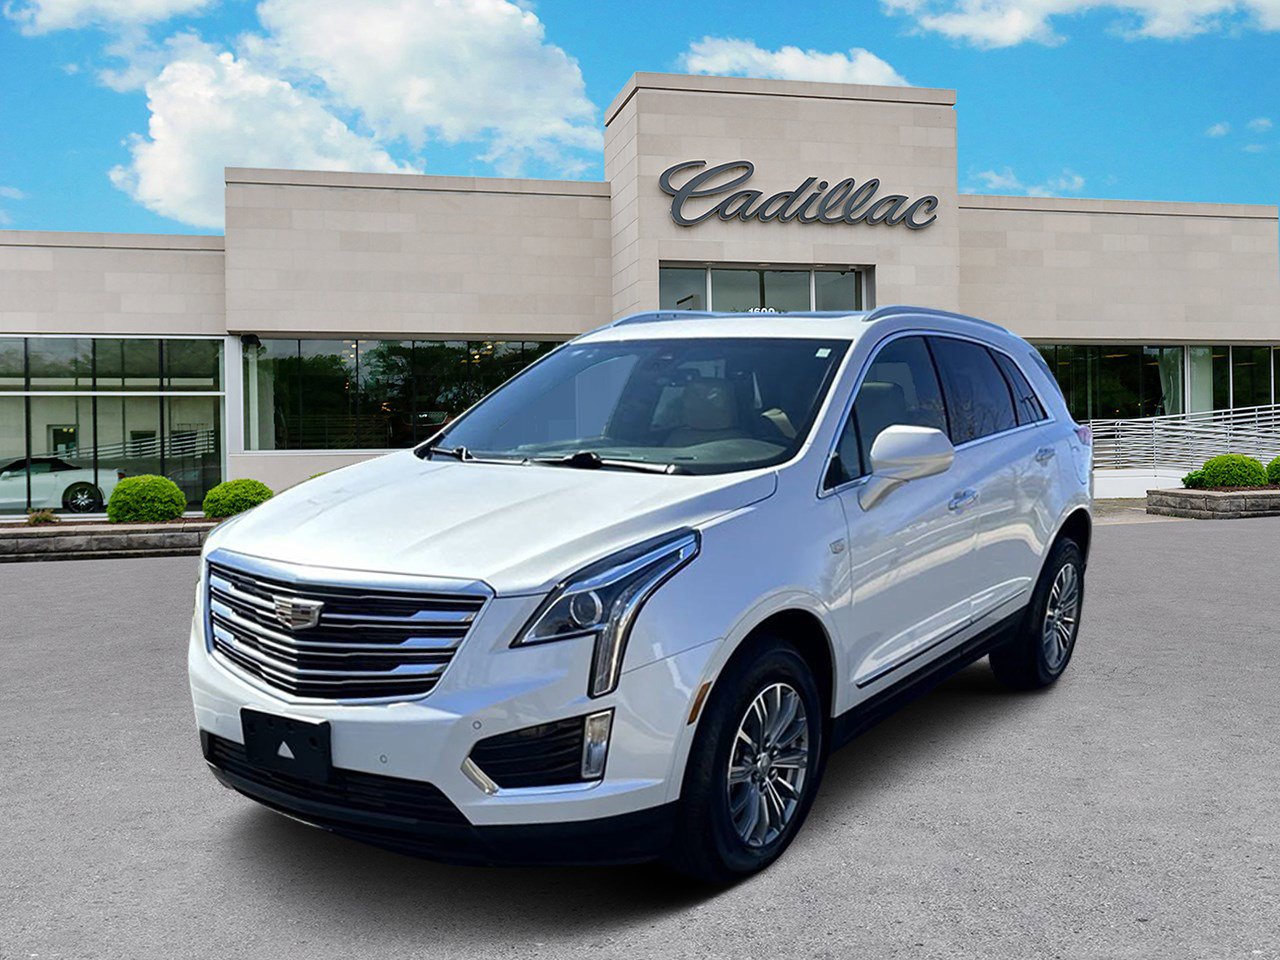 Certified Pre-Owned 2019 Cadillac XT5 3.6L Luxury FWD SUV in Peoria  #1910773 | Uftring Weston Cadillac